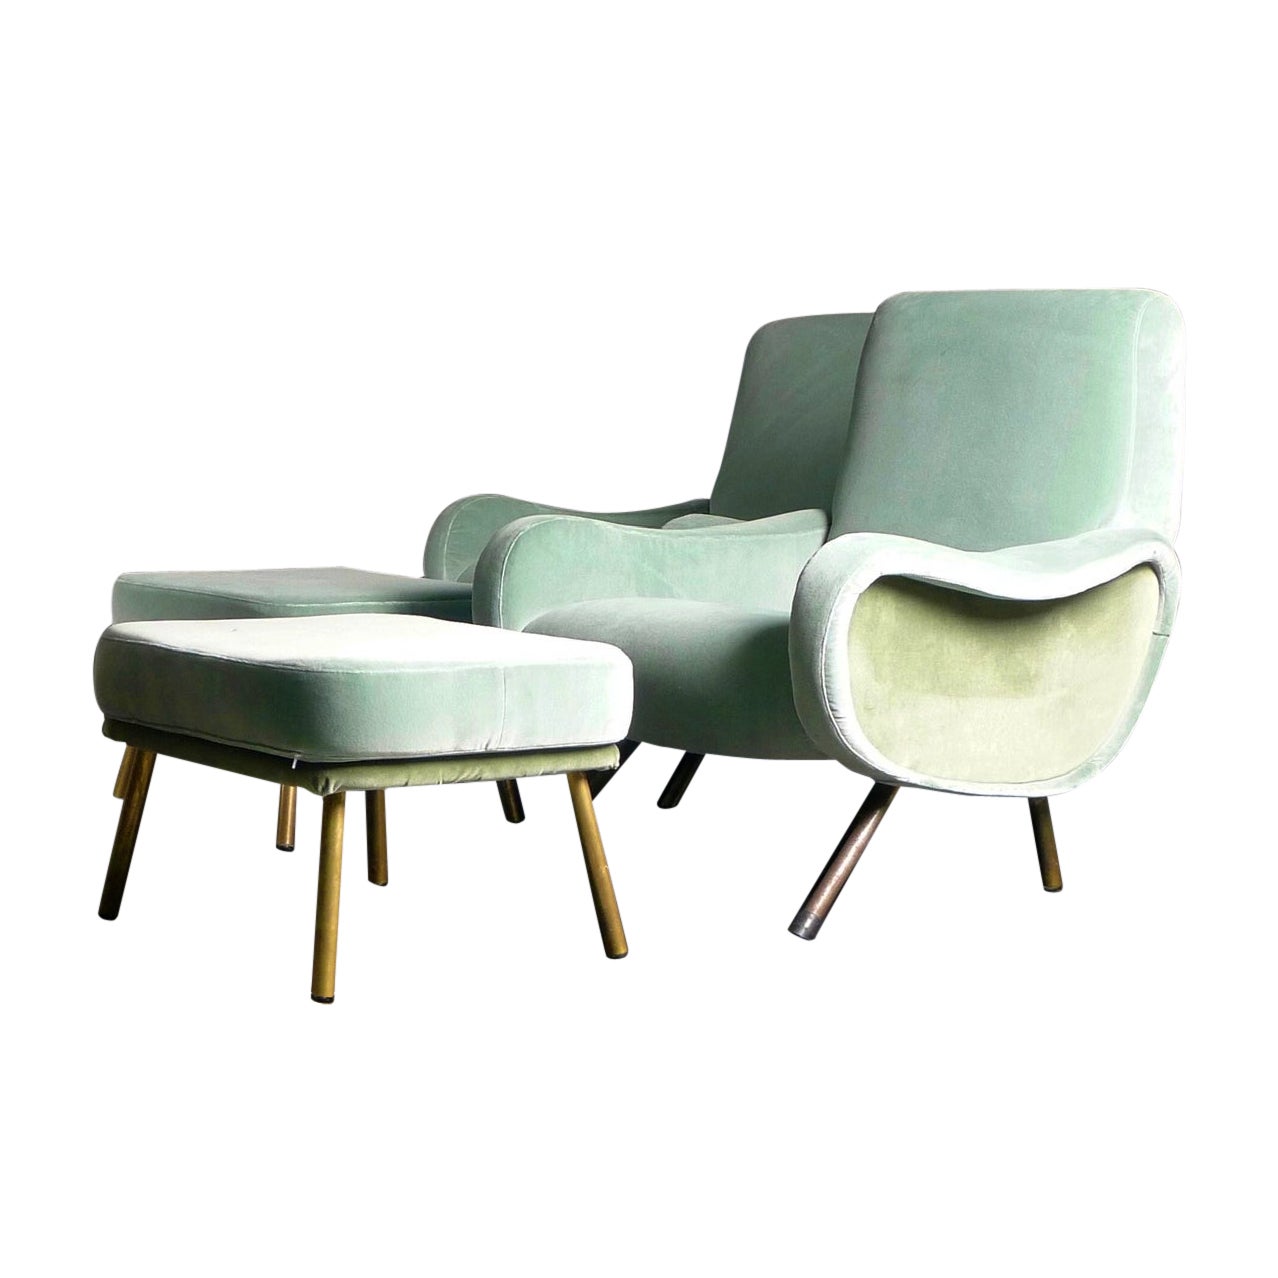 Marco Zanuso, Pair of Lady Chairs and Ottomans, produced by Arflex, Italy 1950s